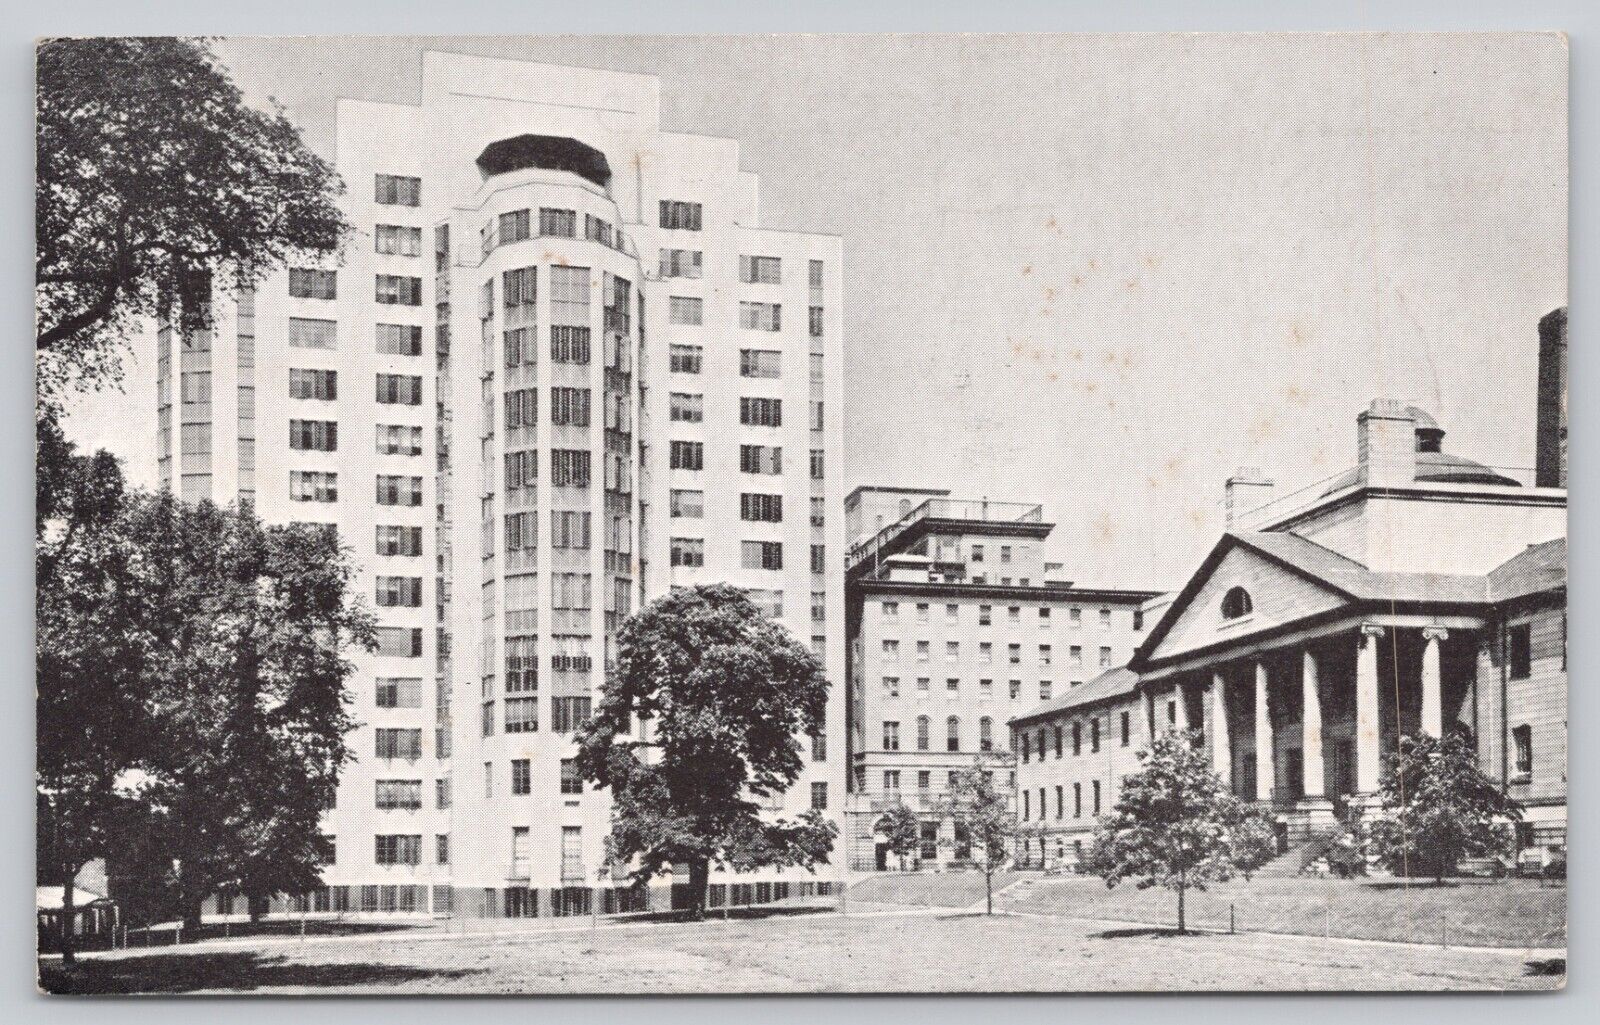 Postcard Boston MA Bulfinch Building and George Robert White Bldg Posted 1945